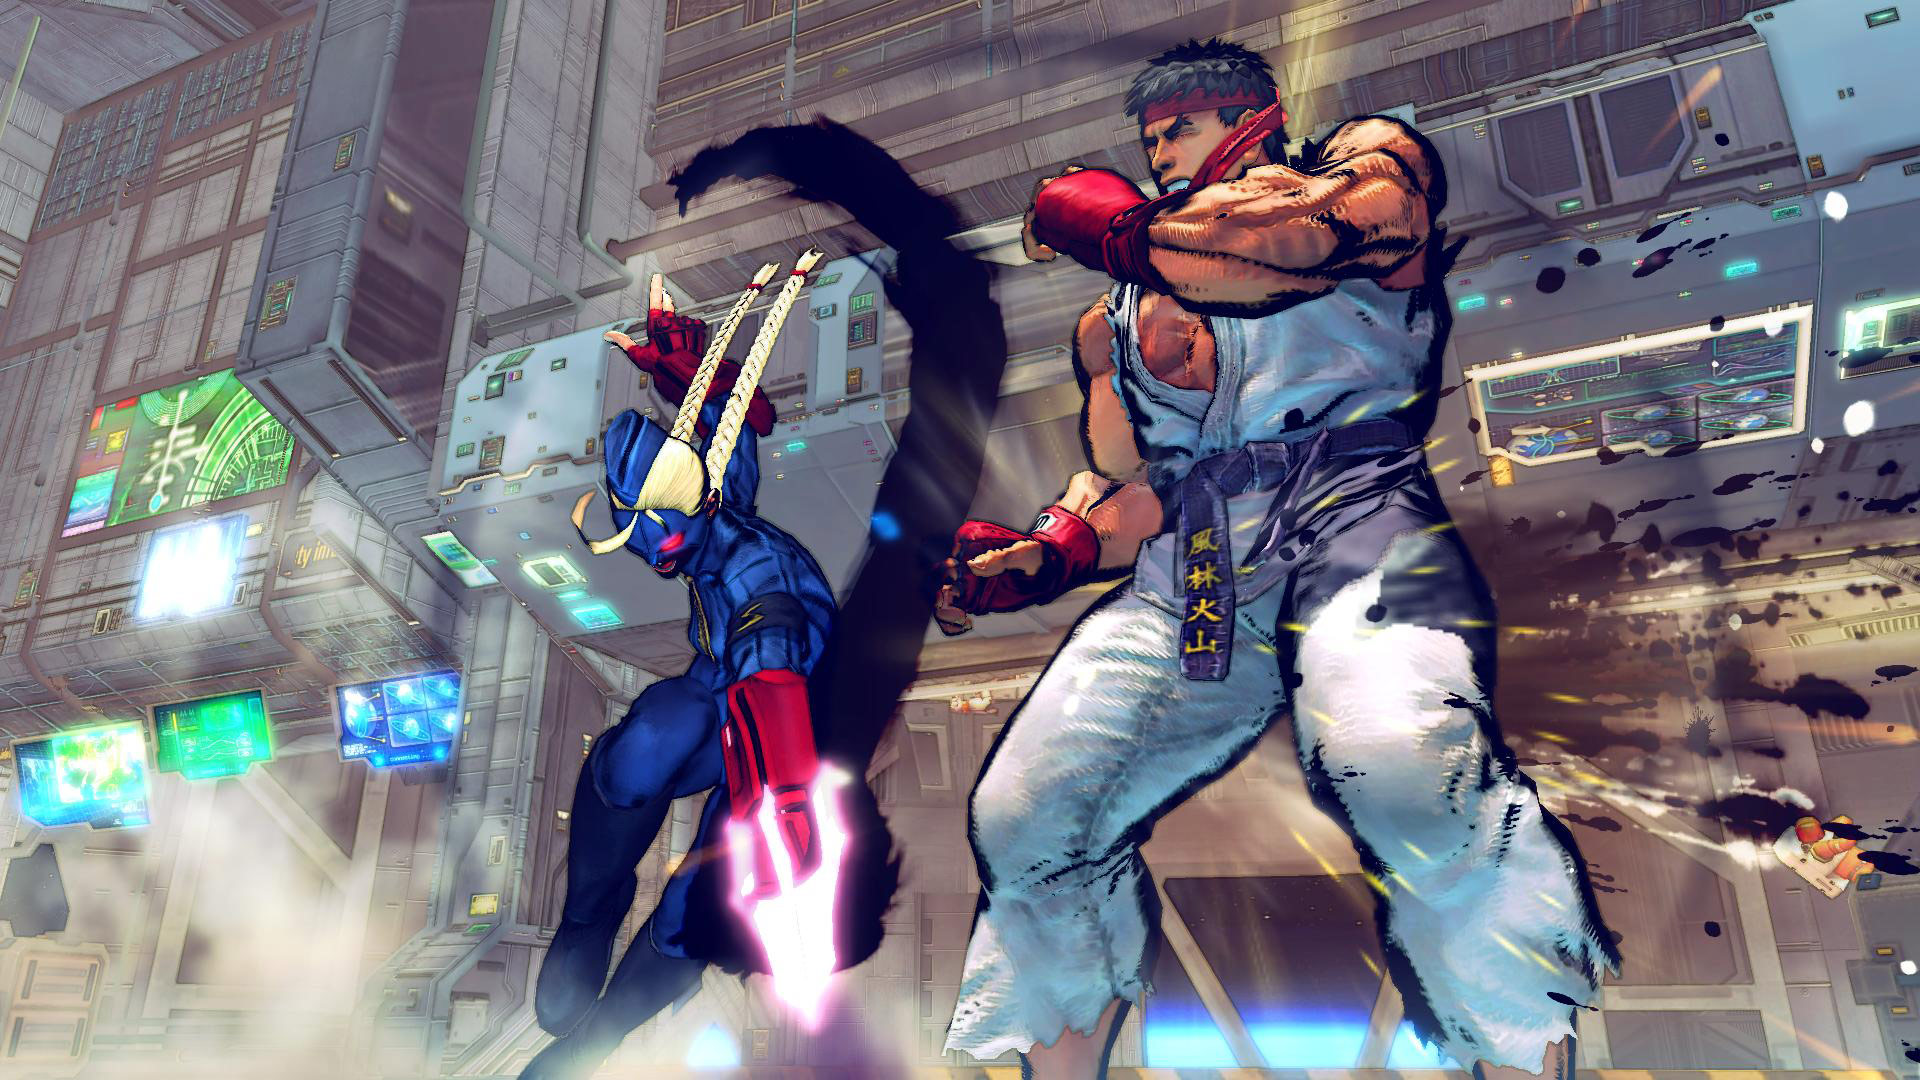 Ultra Street Fighter 4 - TFG Review / Artwork Gallery